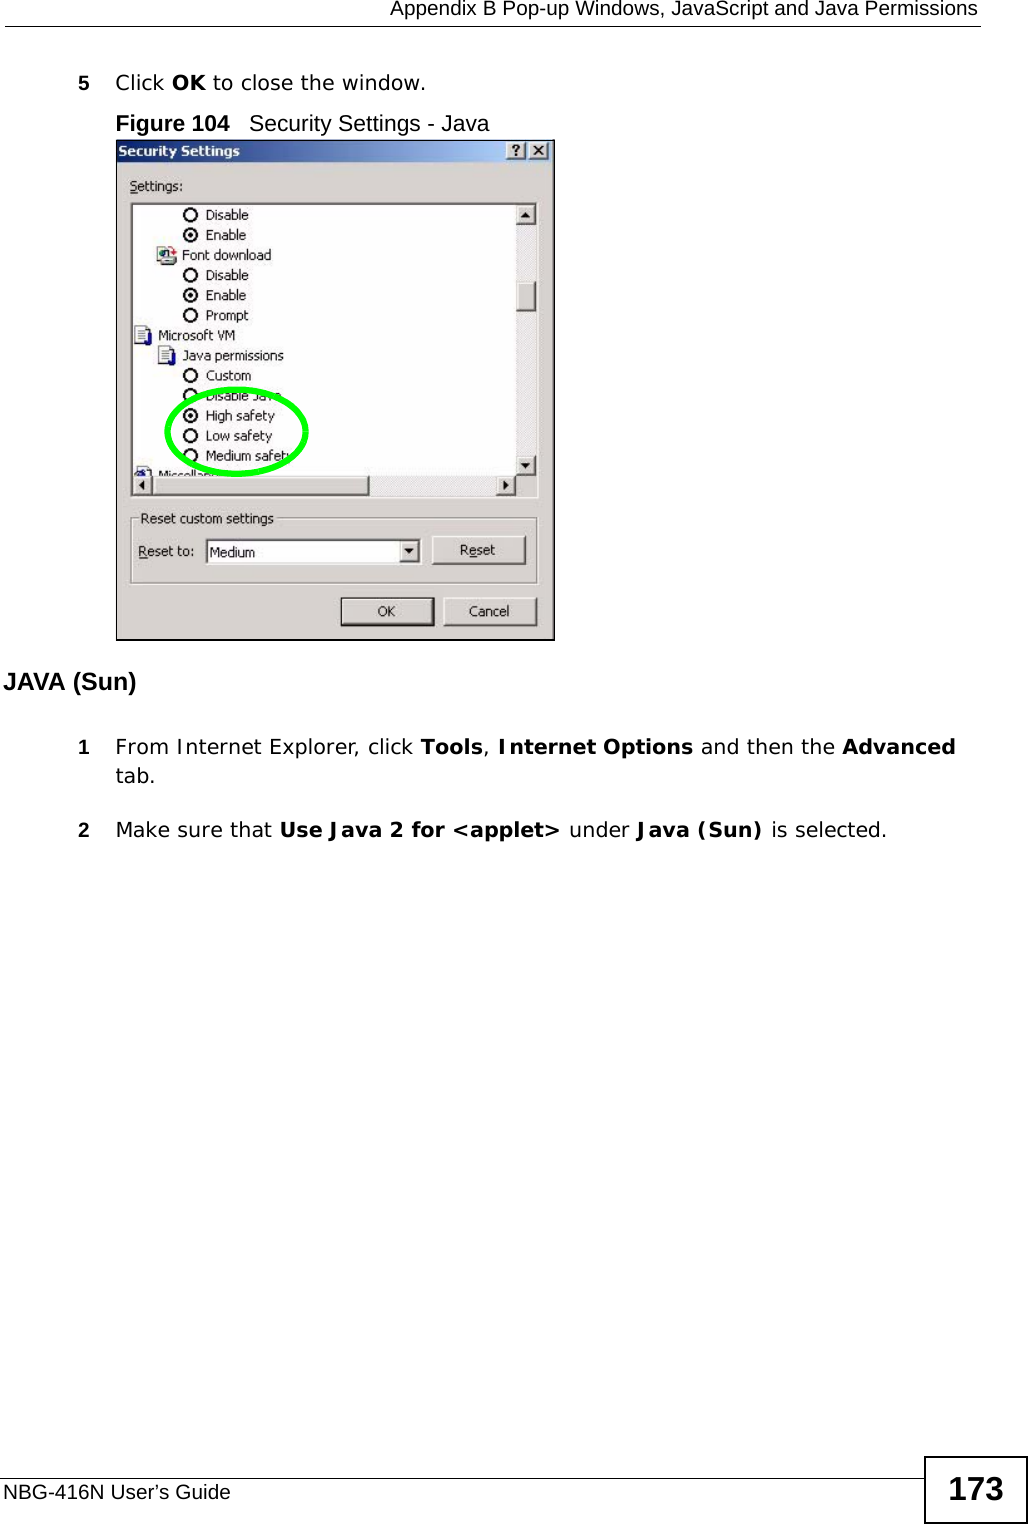  Appendix B Pop-up Windows, JavaScript and Java PermissionsNBG-416N User’s Guide 1735Click OK to close the window.Figure 104   Security Settings - Java JAVA (Sun)1From Internet Explorer, click Tools, Internet Options and then the Advanced tab. 2Make sure that Use Java 2 for &lt;applet&gt; under Java (Sun) is selected.